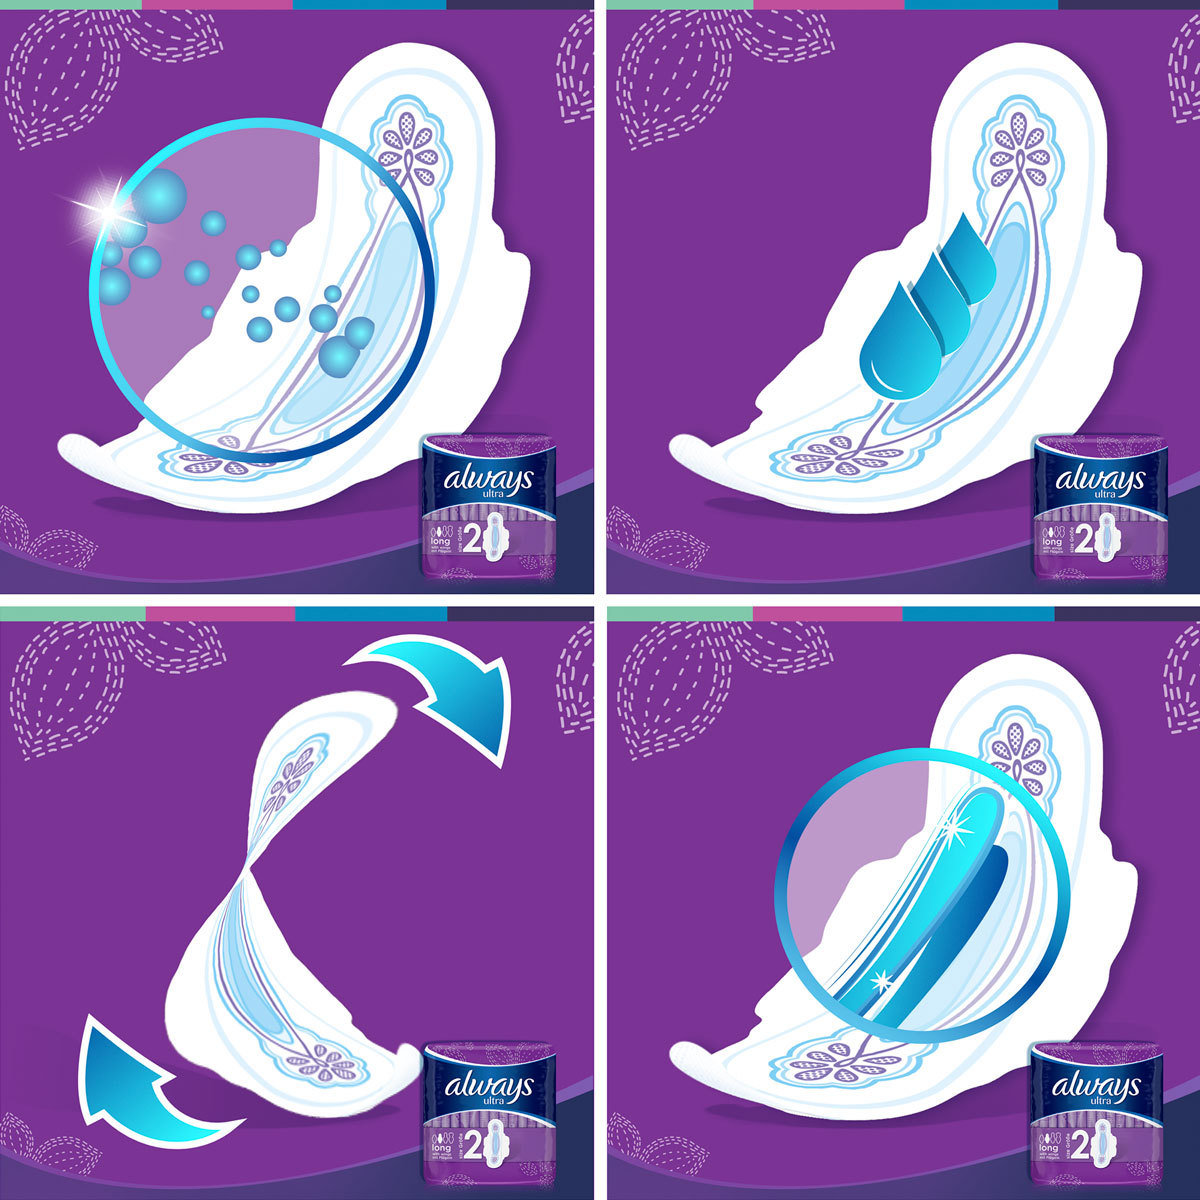 Always Ultra Long Size 2 Sanitary Towels With Wings, 48 Pads